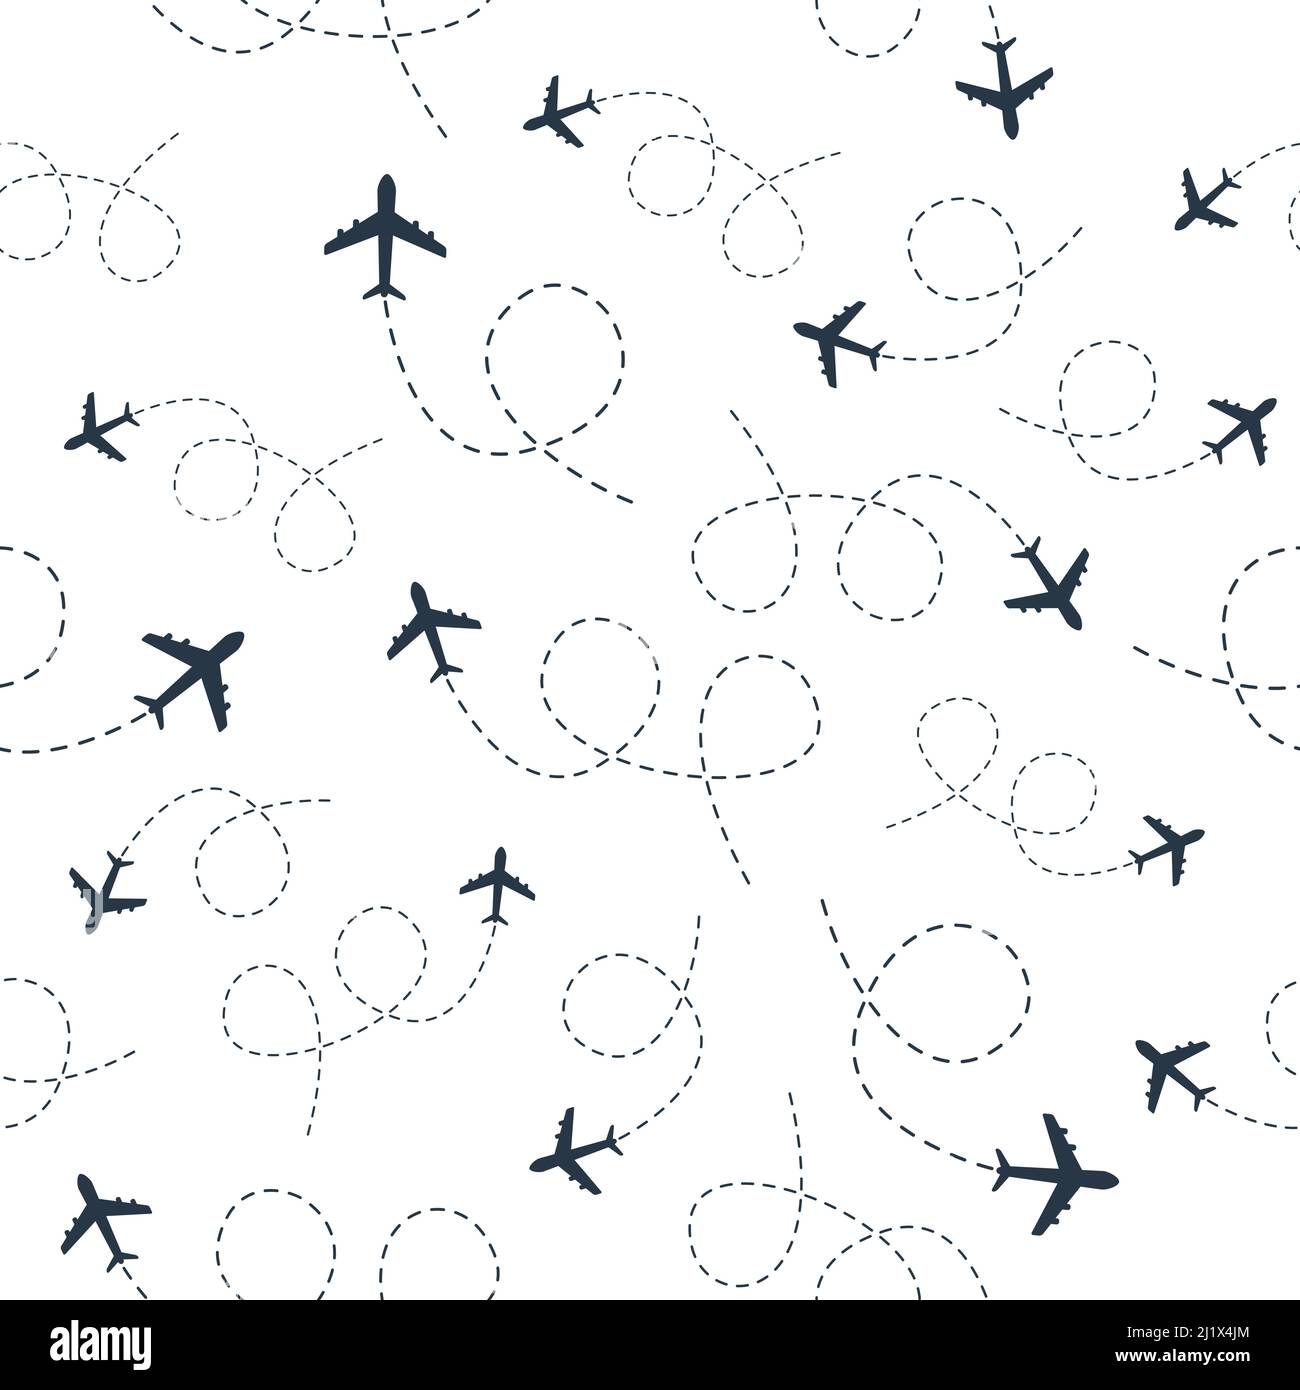 Plane flying with line path seamless pattern. Airplane travel background. Stock Vector